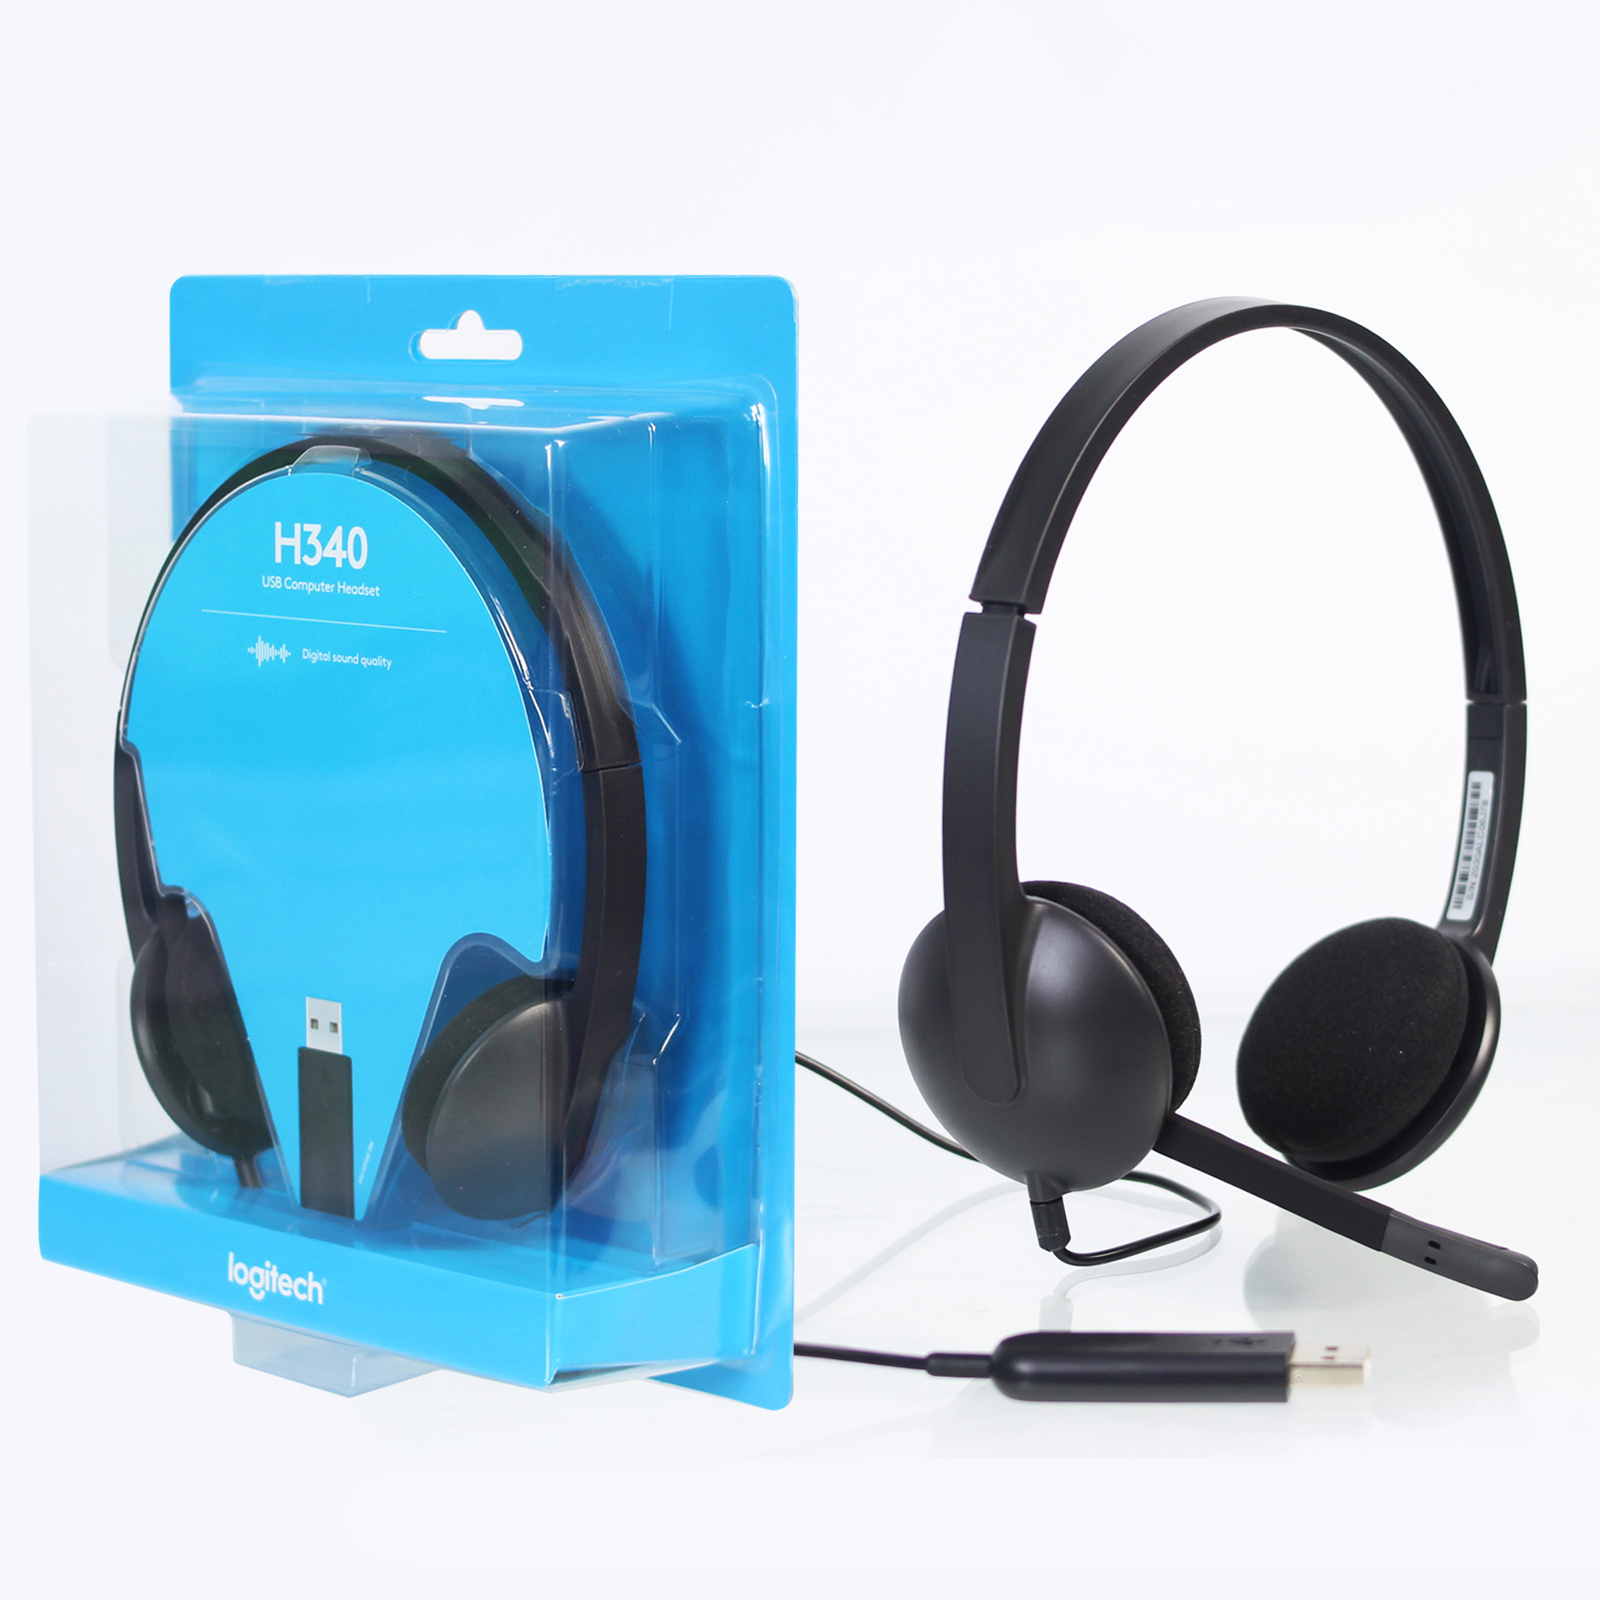 Logitech H340 USB Headset with Noise-Cancelling Mic, Plug and Play, Digital Stereo Sound | Lazada PH